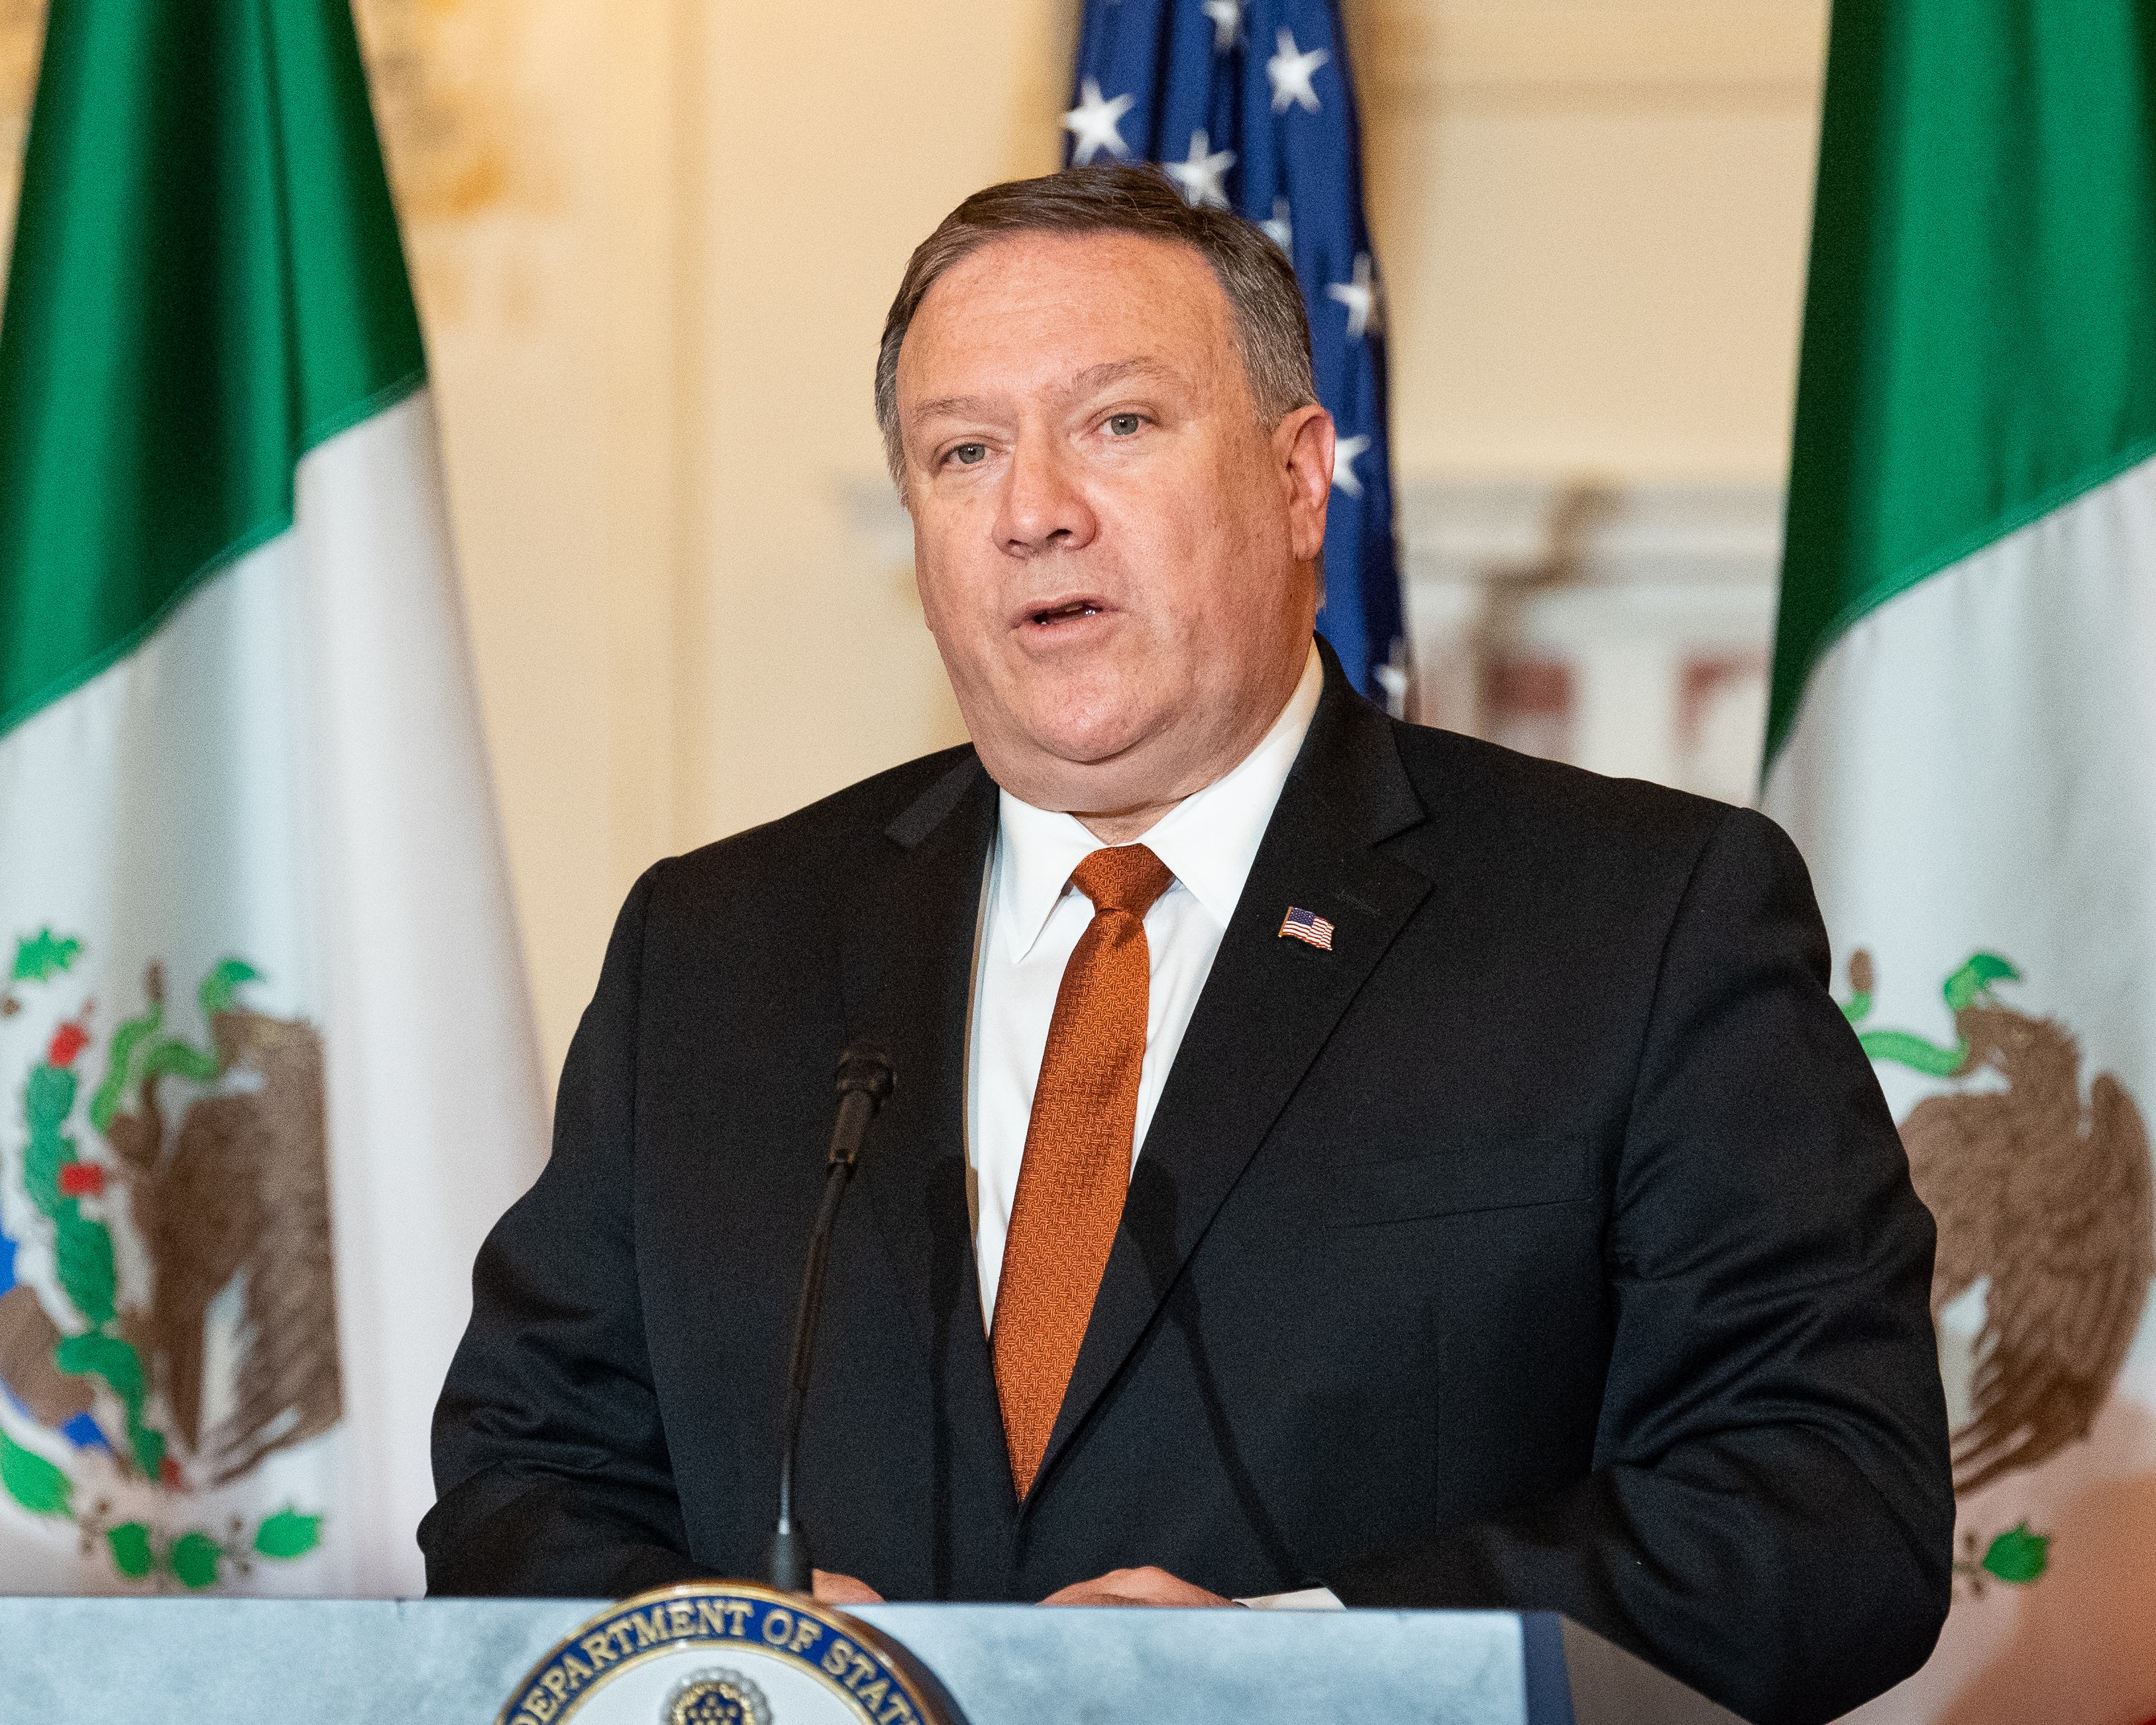 U.S. Secretary of State Mike Pompeo at the State Department